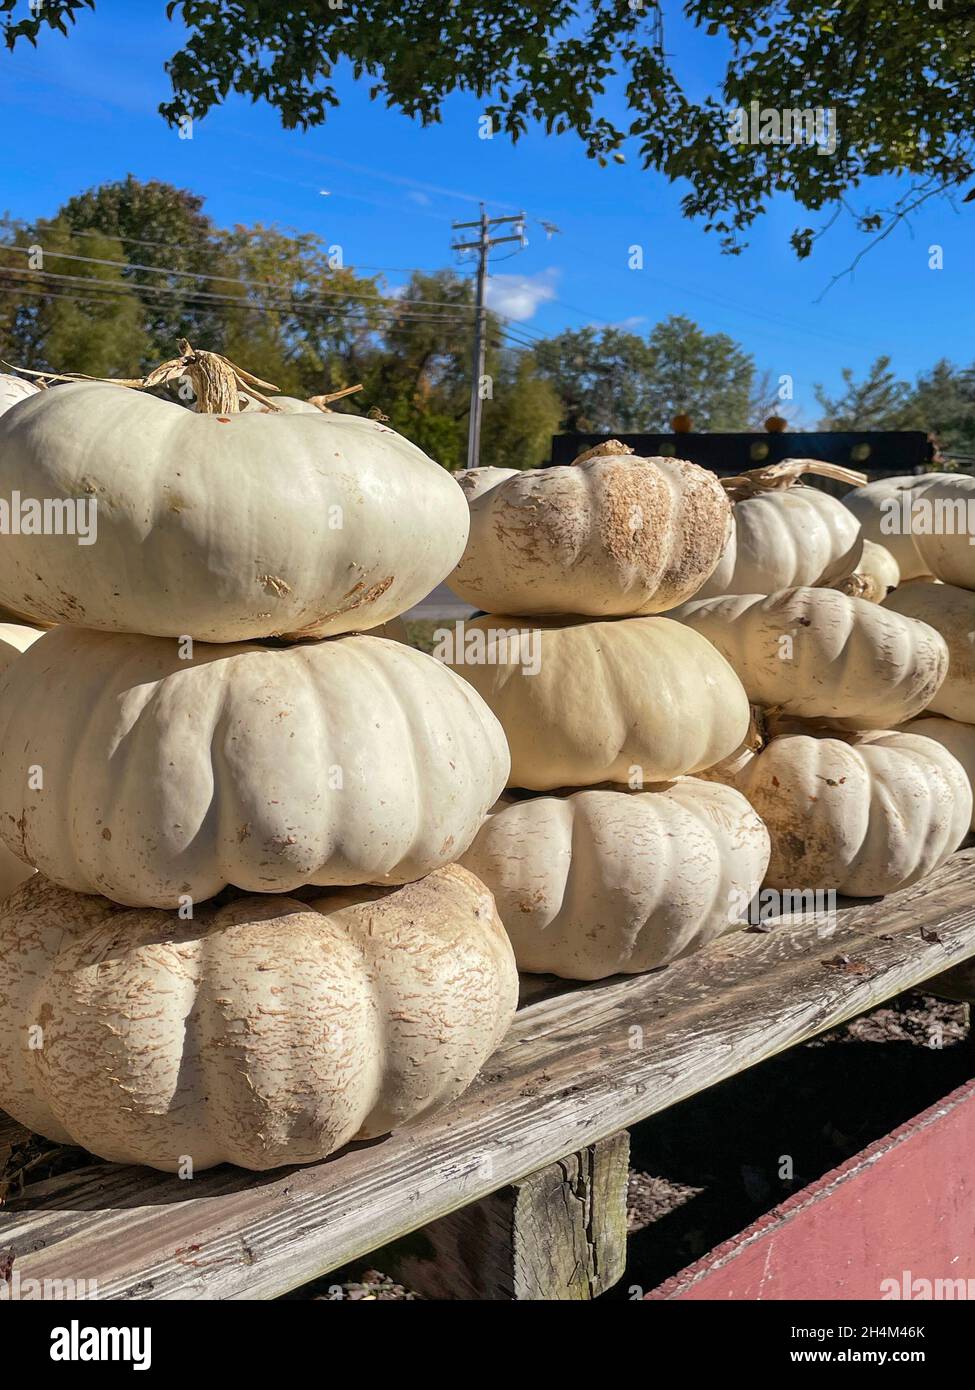 White pumpkins arranged in decorative stacks are piled on a rustic wooden table at a roadside farmstand in the autumn. Stock Photo